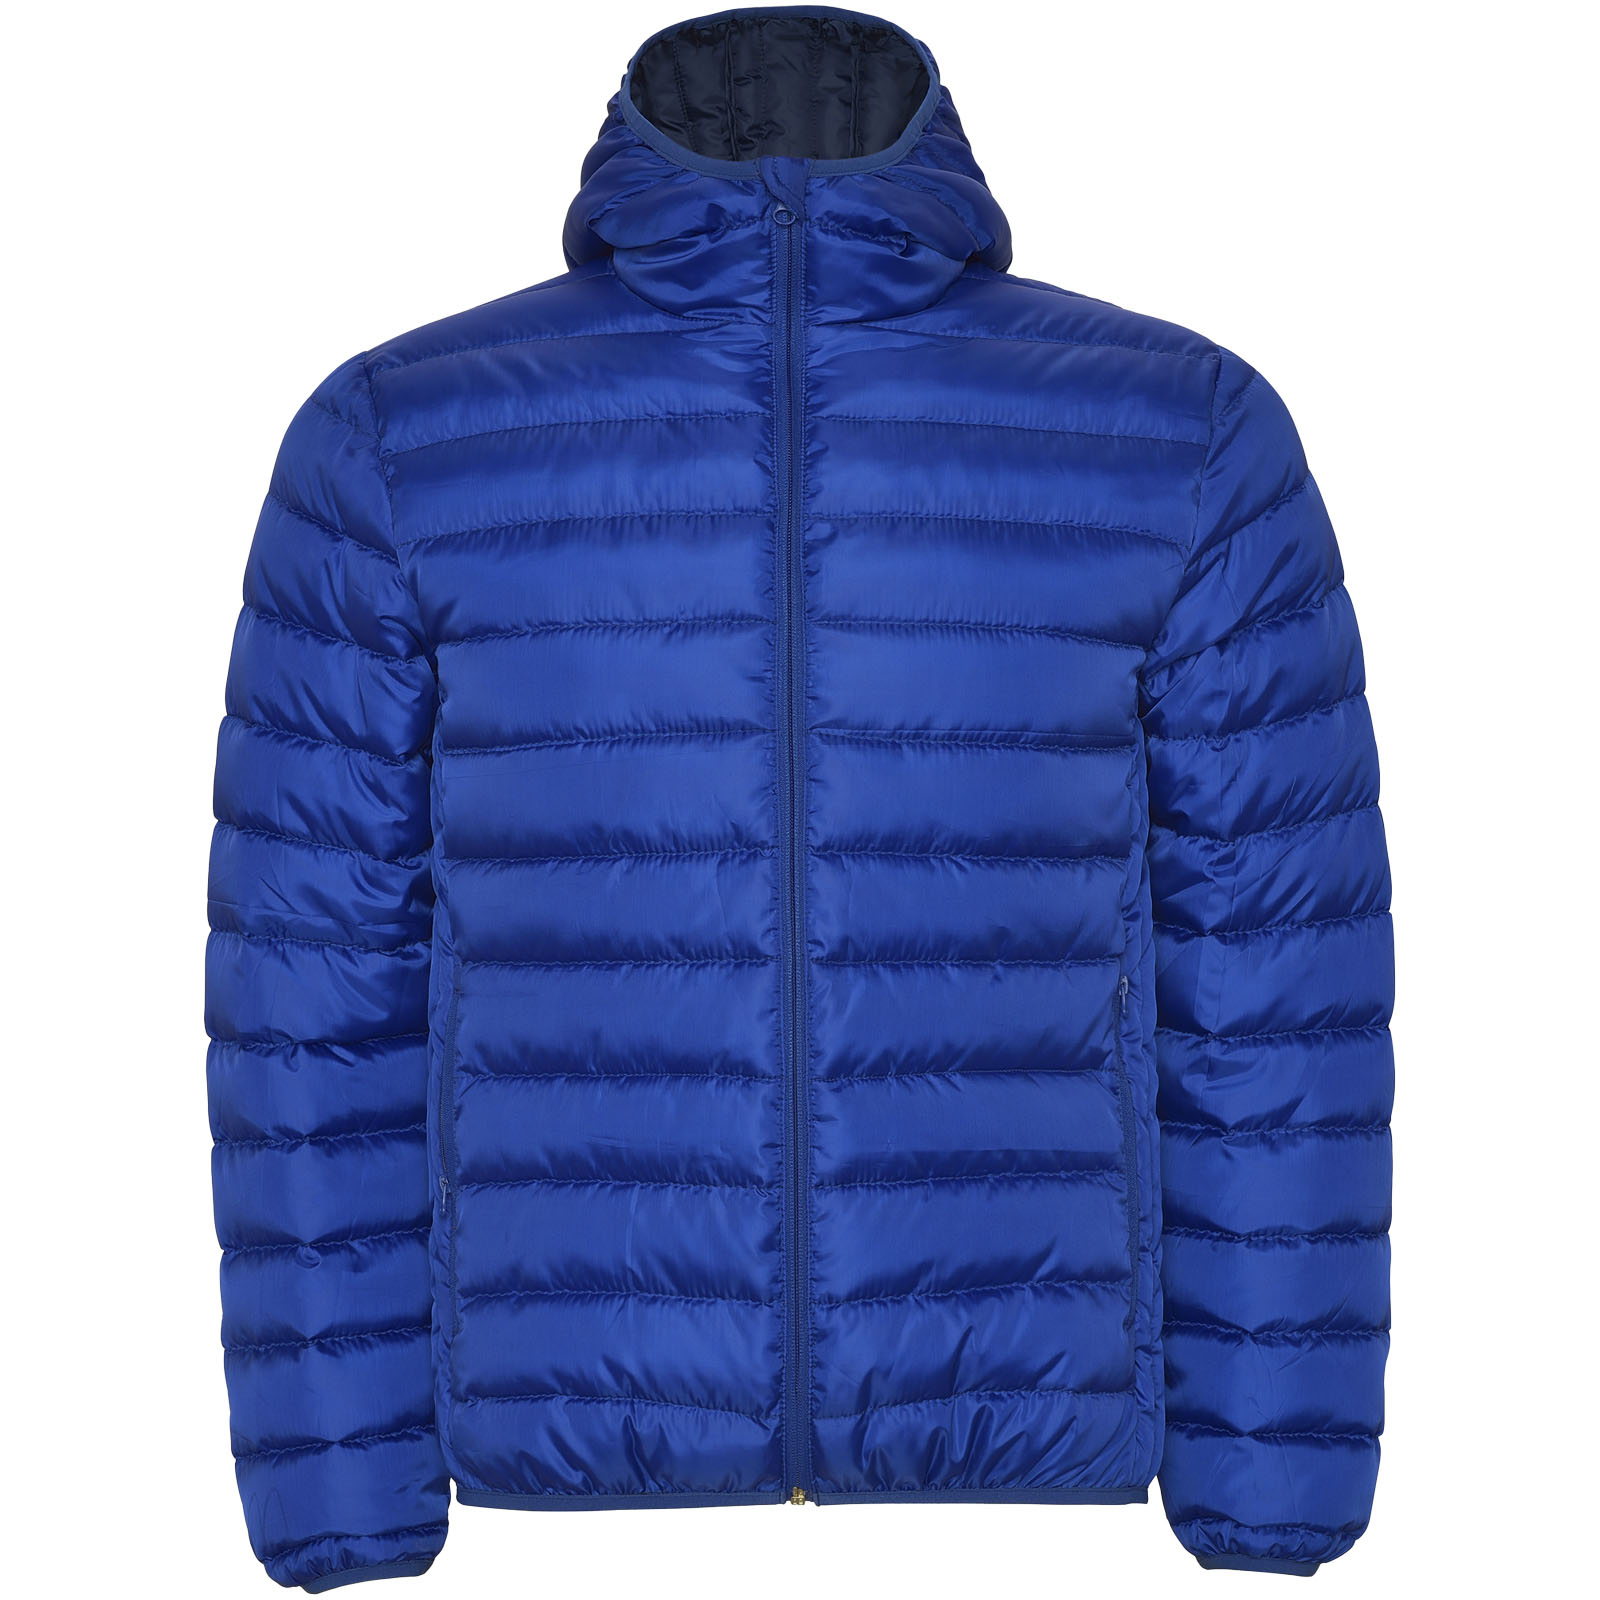 Advertising Jackets - Norway men's insulated jacket - 0